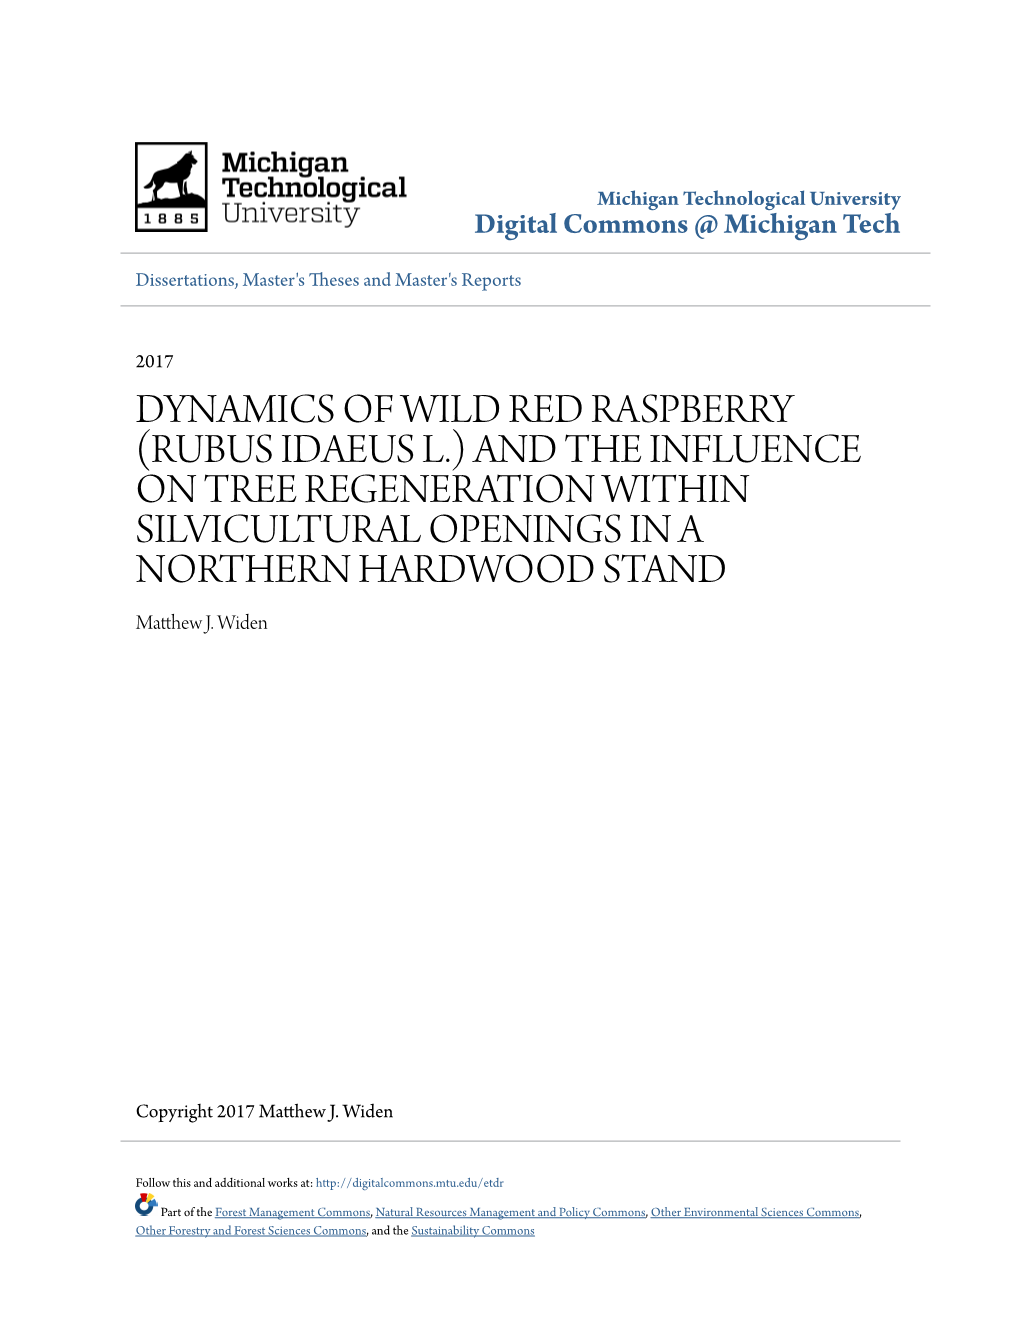 DYNAMICS of WILD RED RASPBERRY (RUBUS IDAEUS L.) and the INFLUENCE on TREE REGENERATION WITHIN SILVICULTURAL OPENINGS in a NORTHERN HARDWOOD STAND Matthew .J Widen